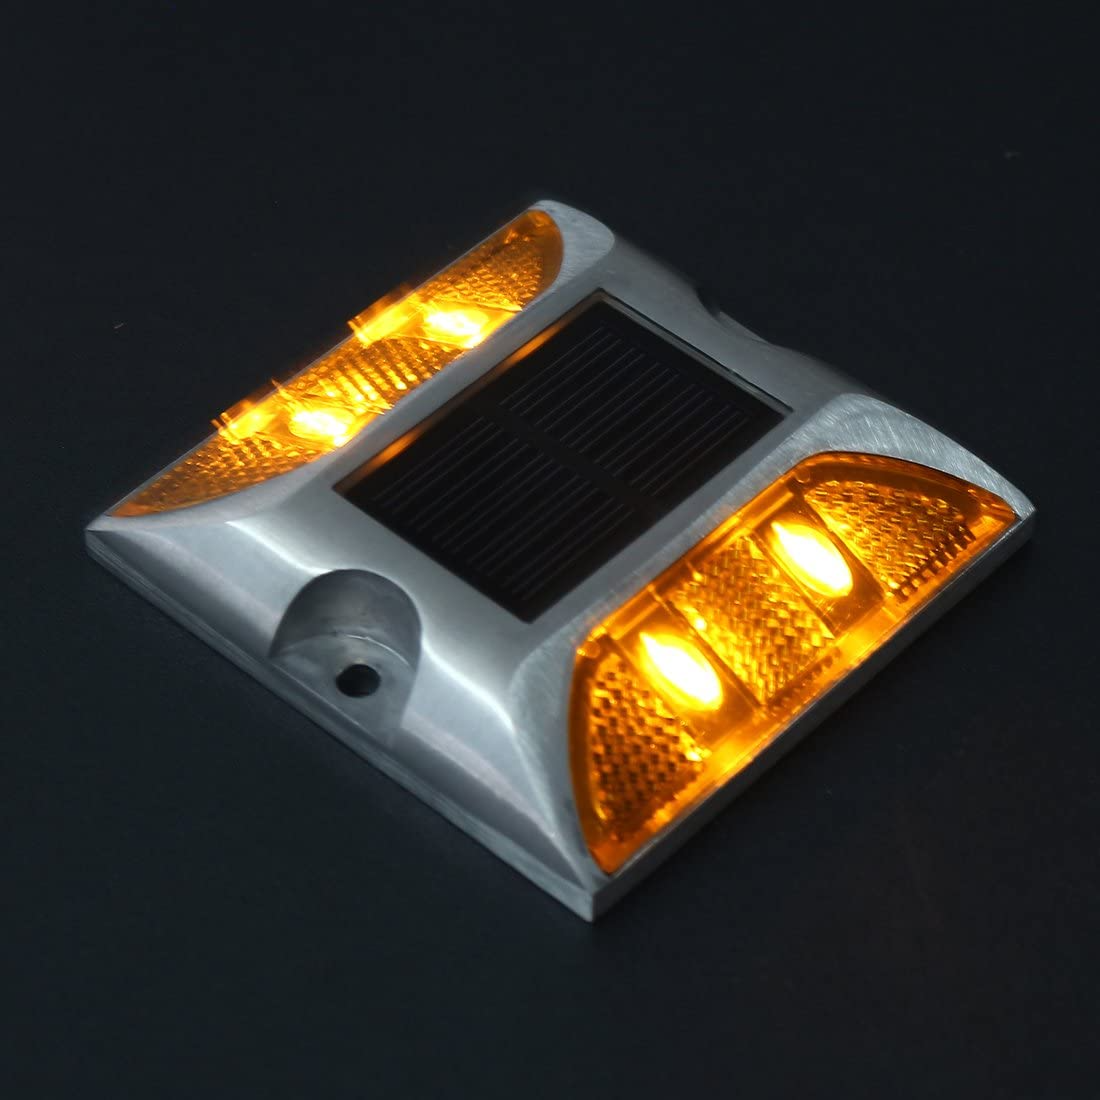 Buy uxcell 2pcs LED Solar Road Stud Light Marker Lighting Security Lamp Lamp  4LED Yellow Online at Lowest Price in بحرين. B078GZP5JB